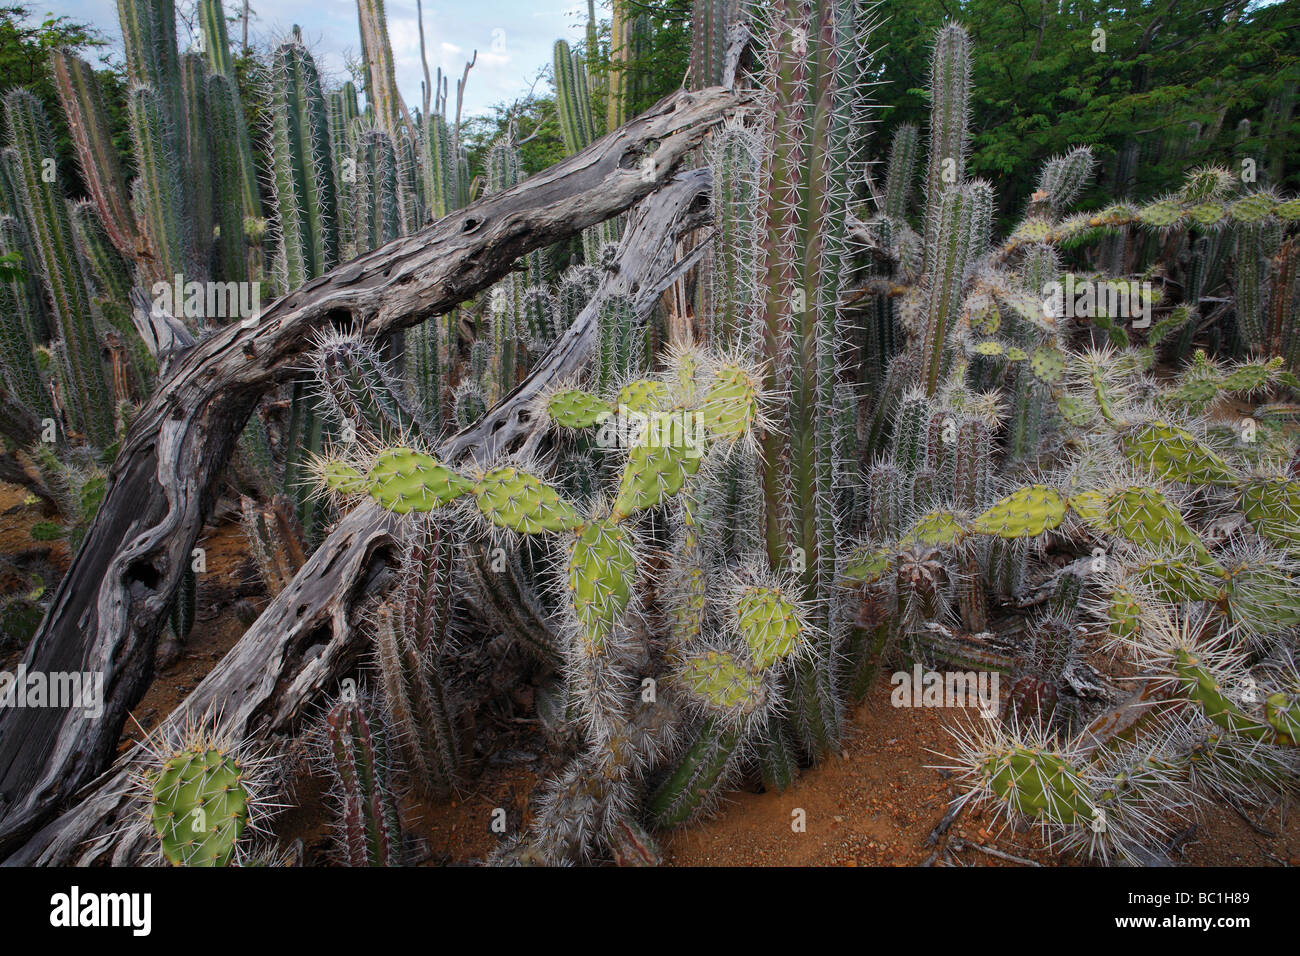 Cactus thicket including Candle Cactus Ritterocereus griseus and Prickly Pear Cactus Opuntia wentiana Stock Photo